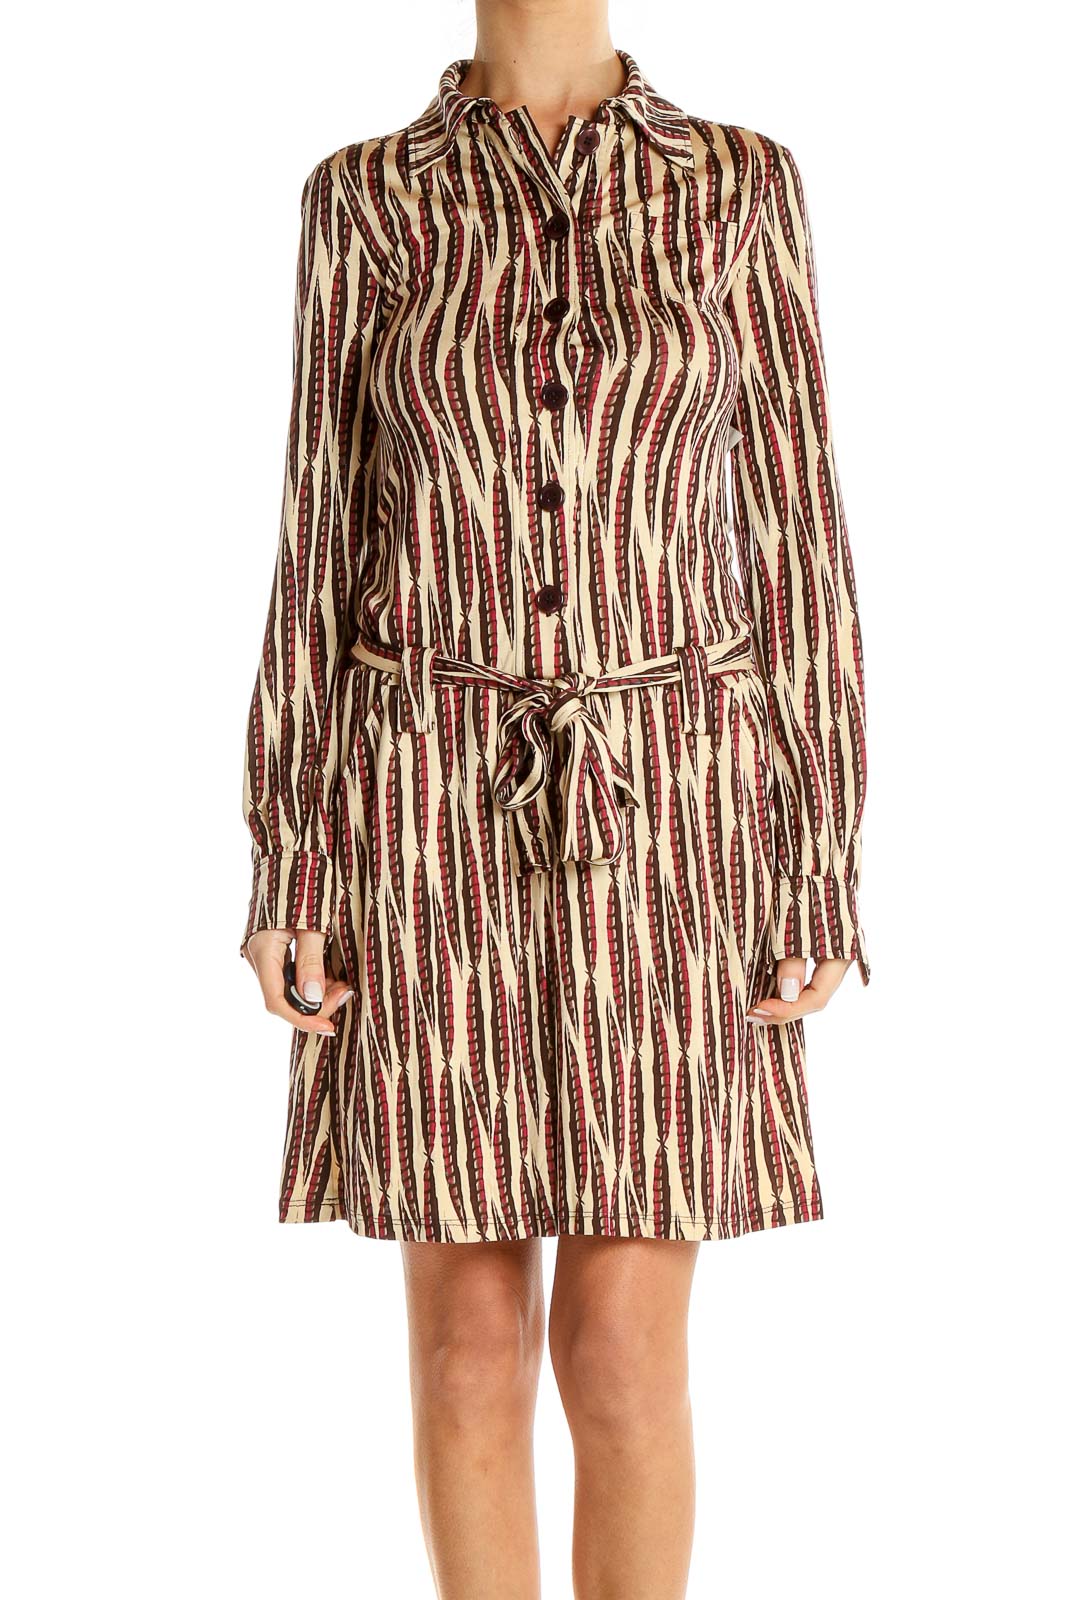 Beige Red Feather Printed Shift Dress Front